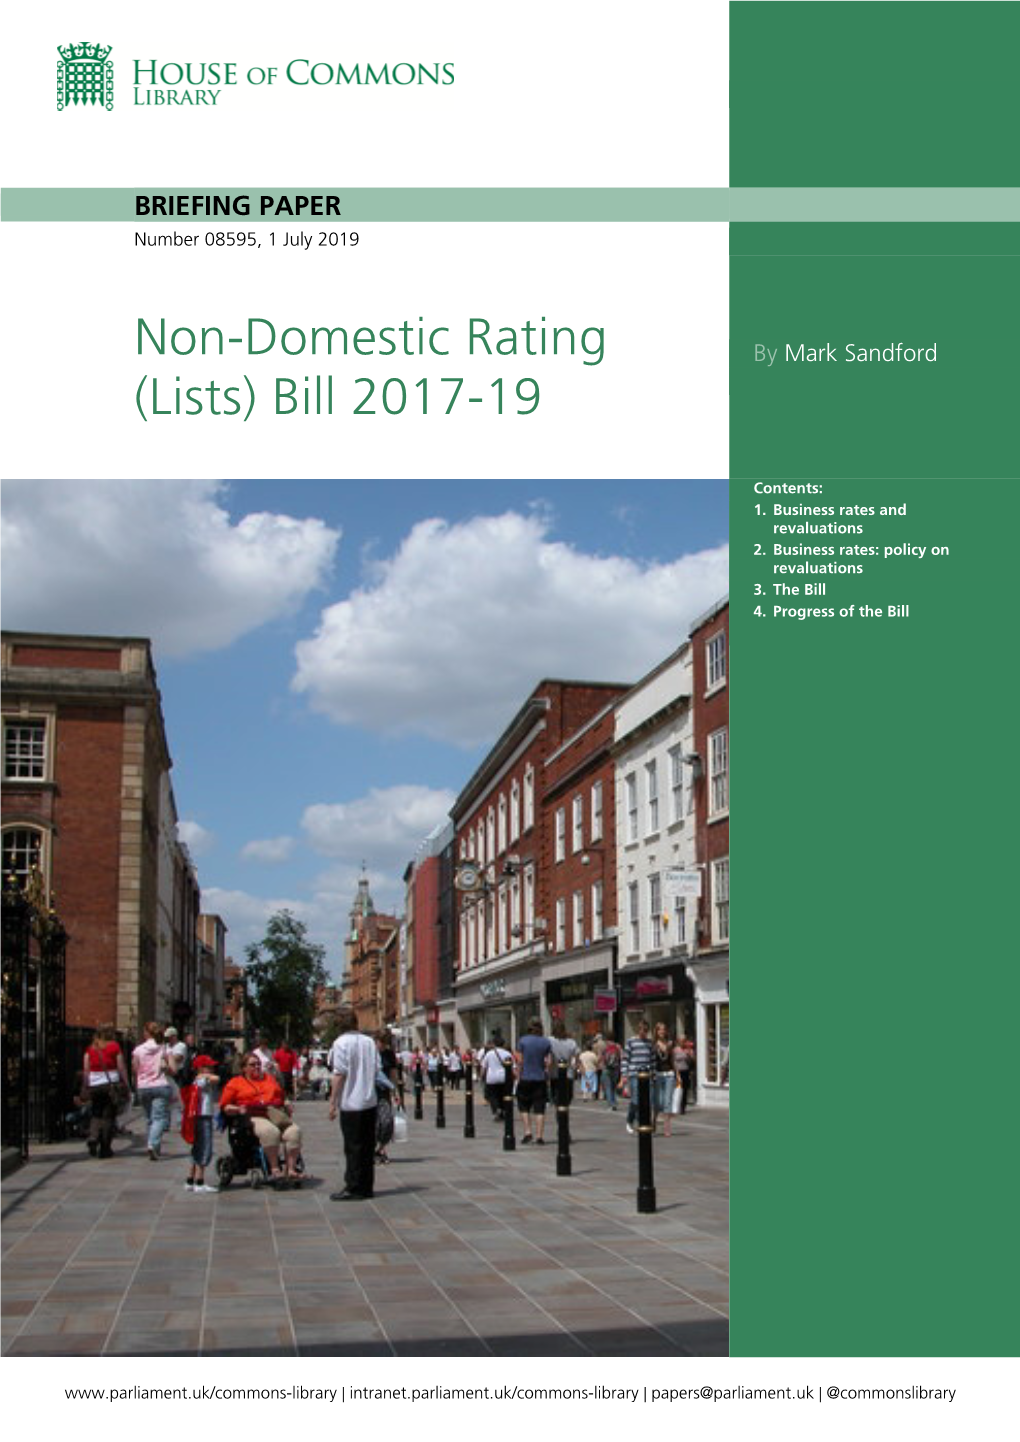 Non-Domestic Rating by Mark Sandford